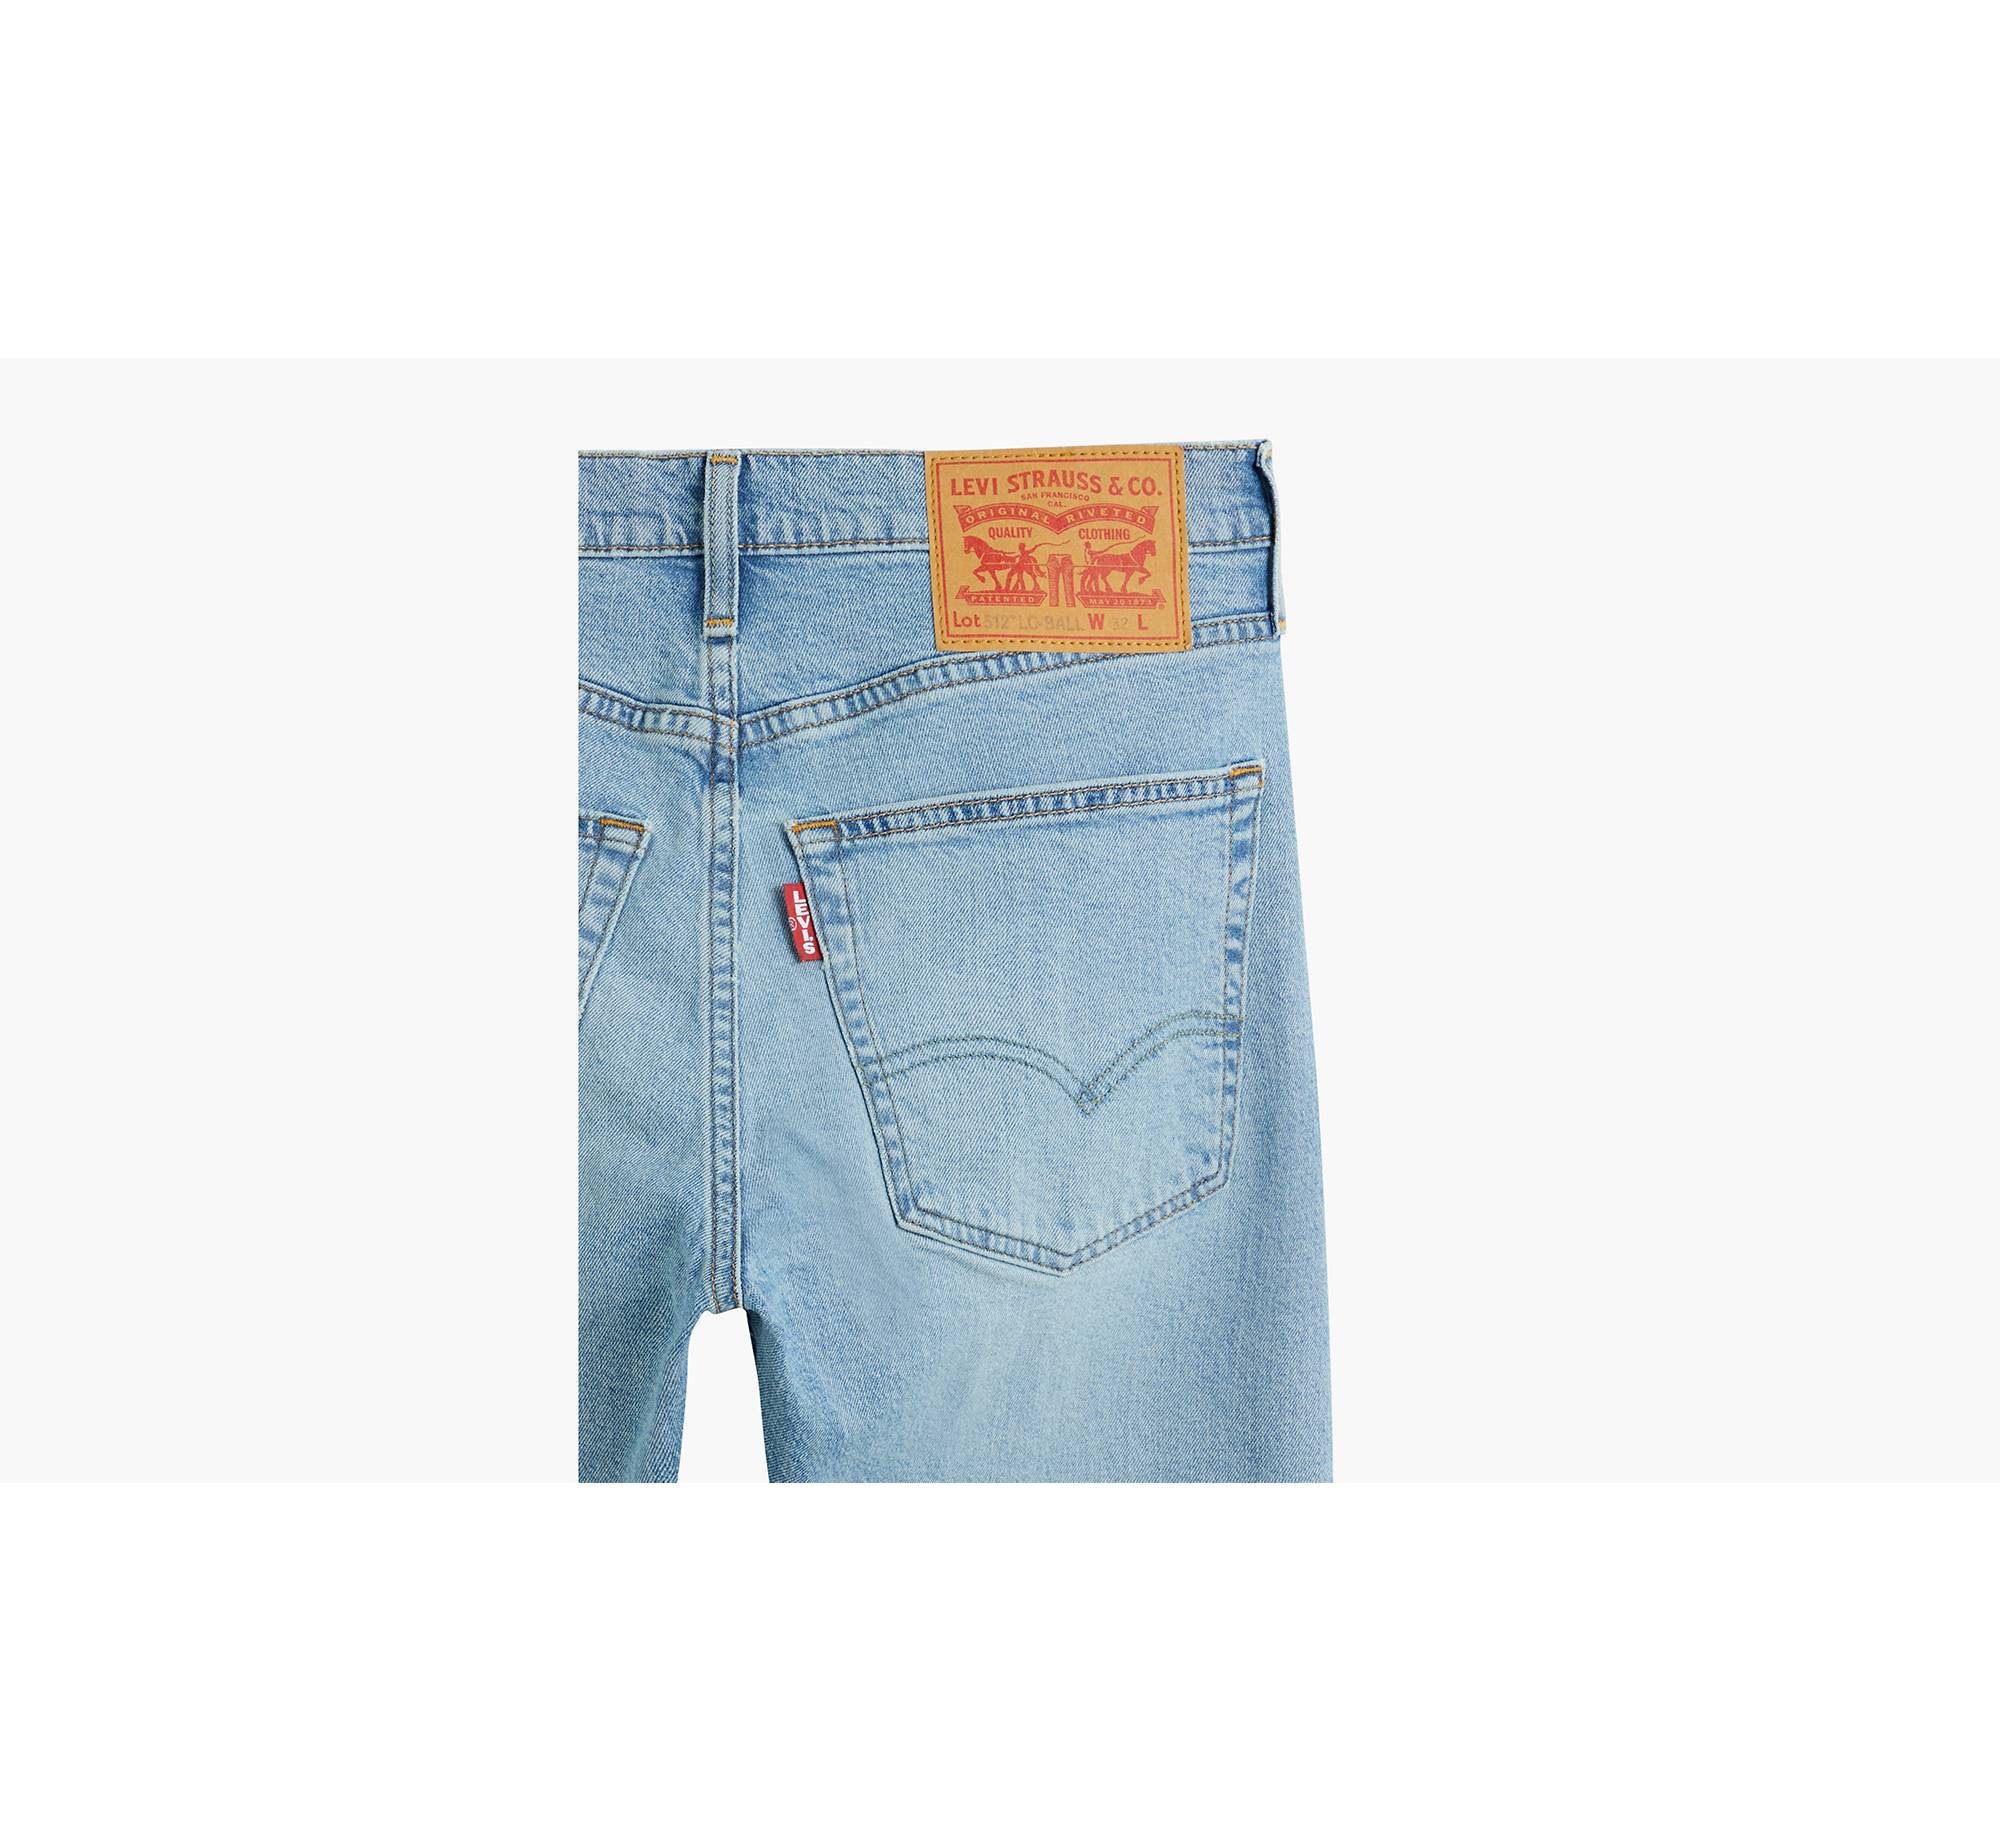 512™ Slim Tapered Lo-ball Jeans - Blue | Levi's® XK